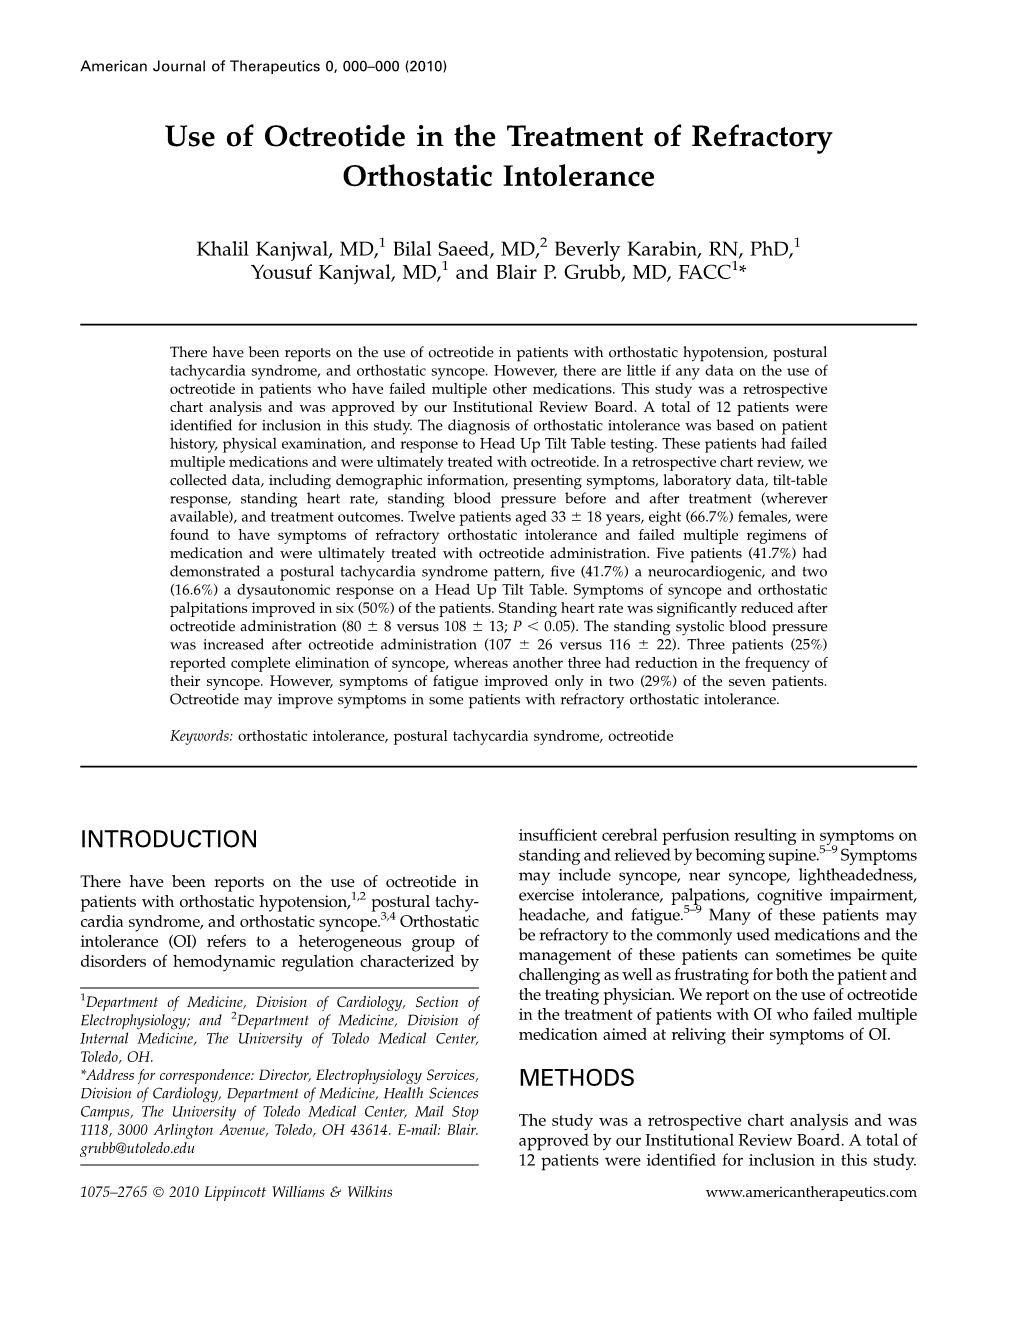 Use of Octreotide in the Treatment of Refractory Orthostatic Intolerance